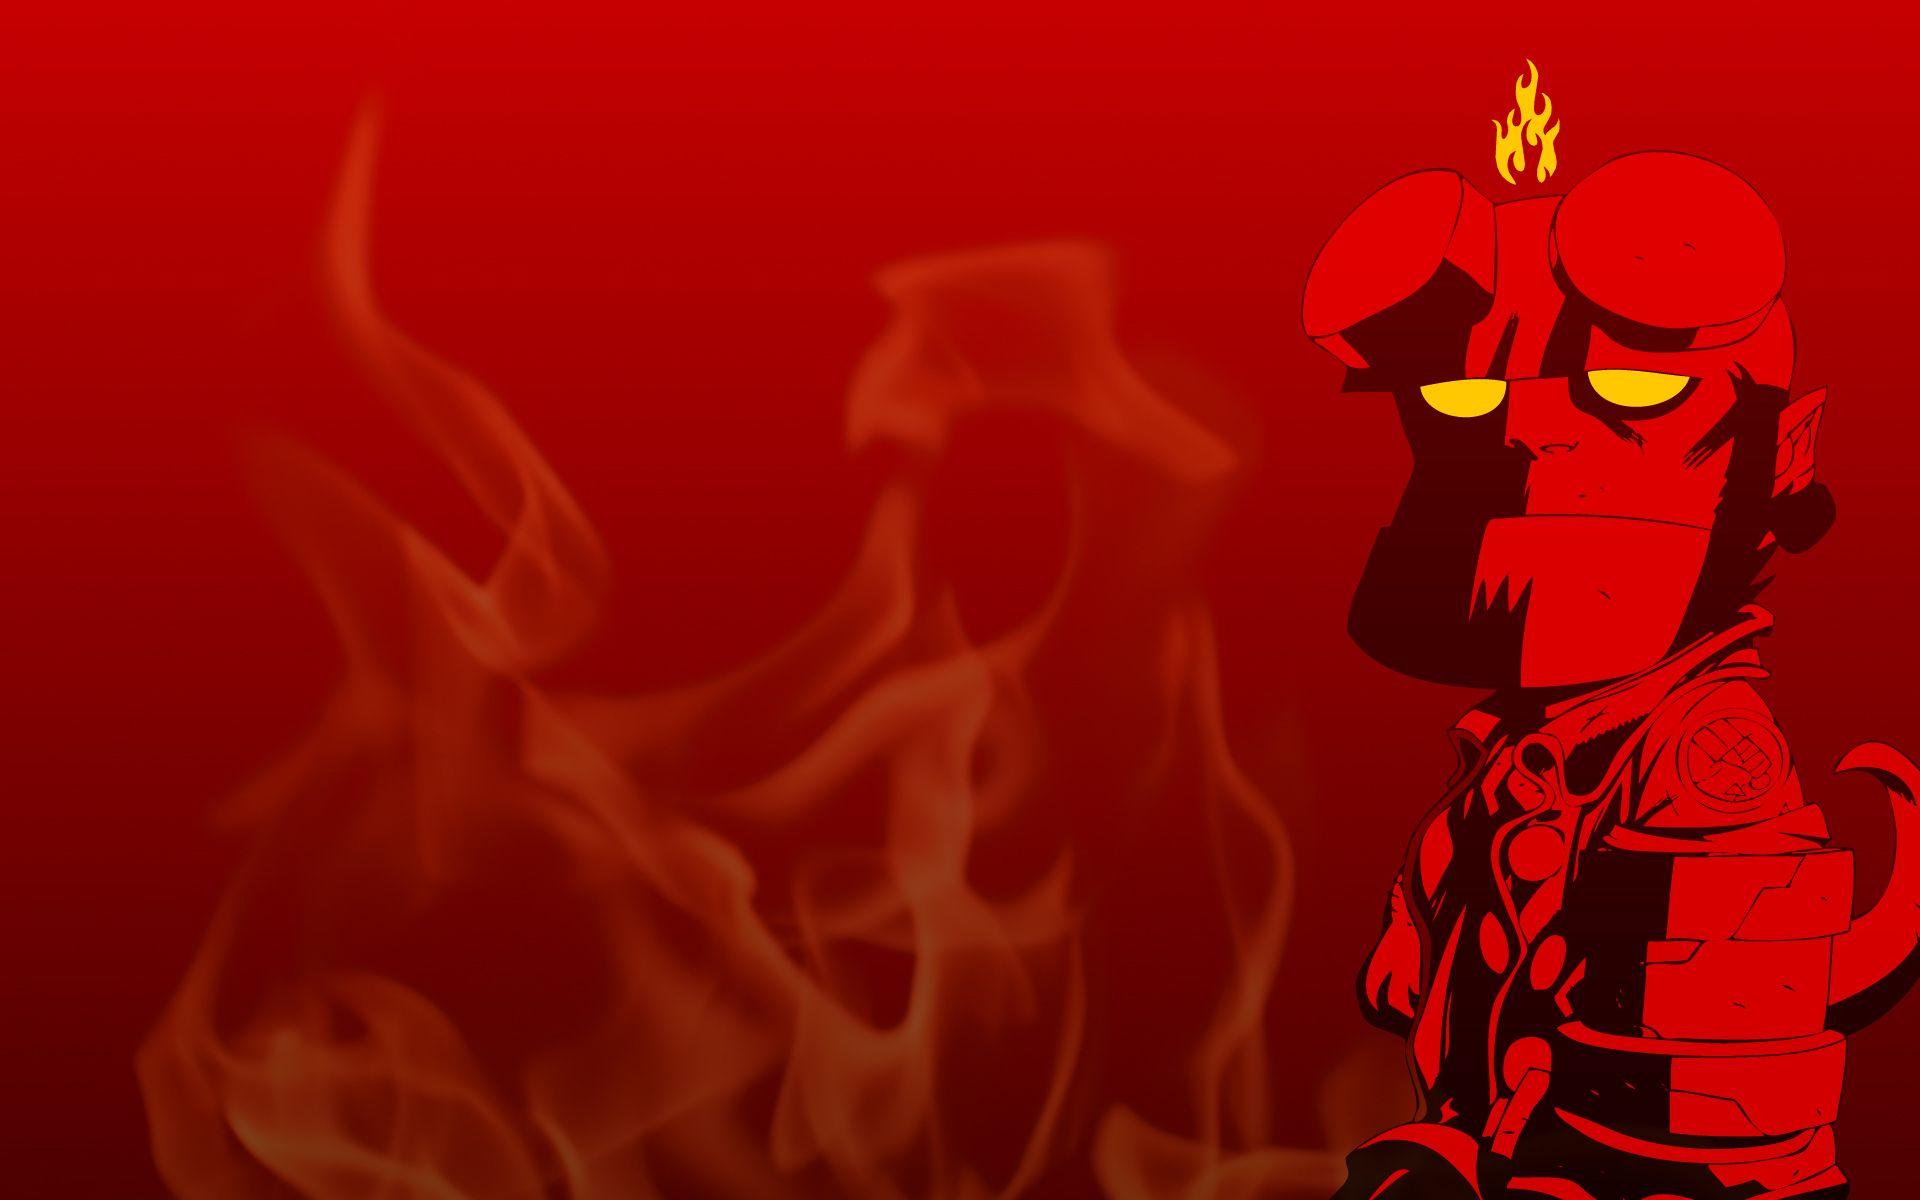 Download the Little Hellboy Wallpaper, Little Hellboy iPhone